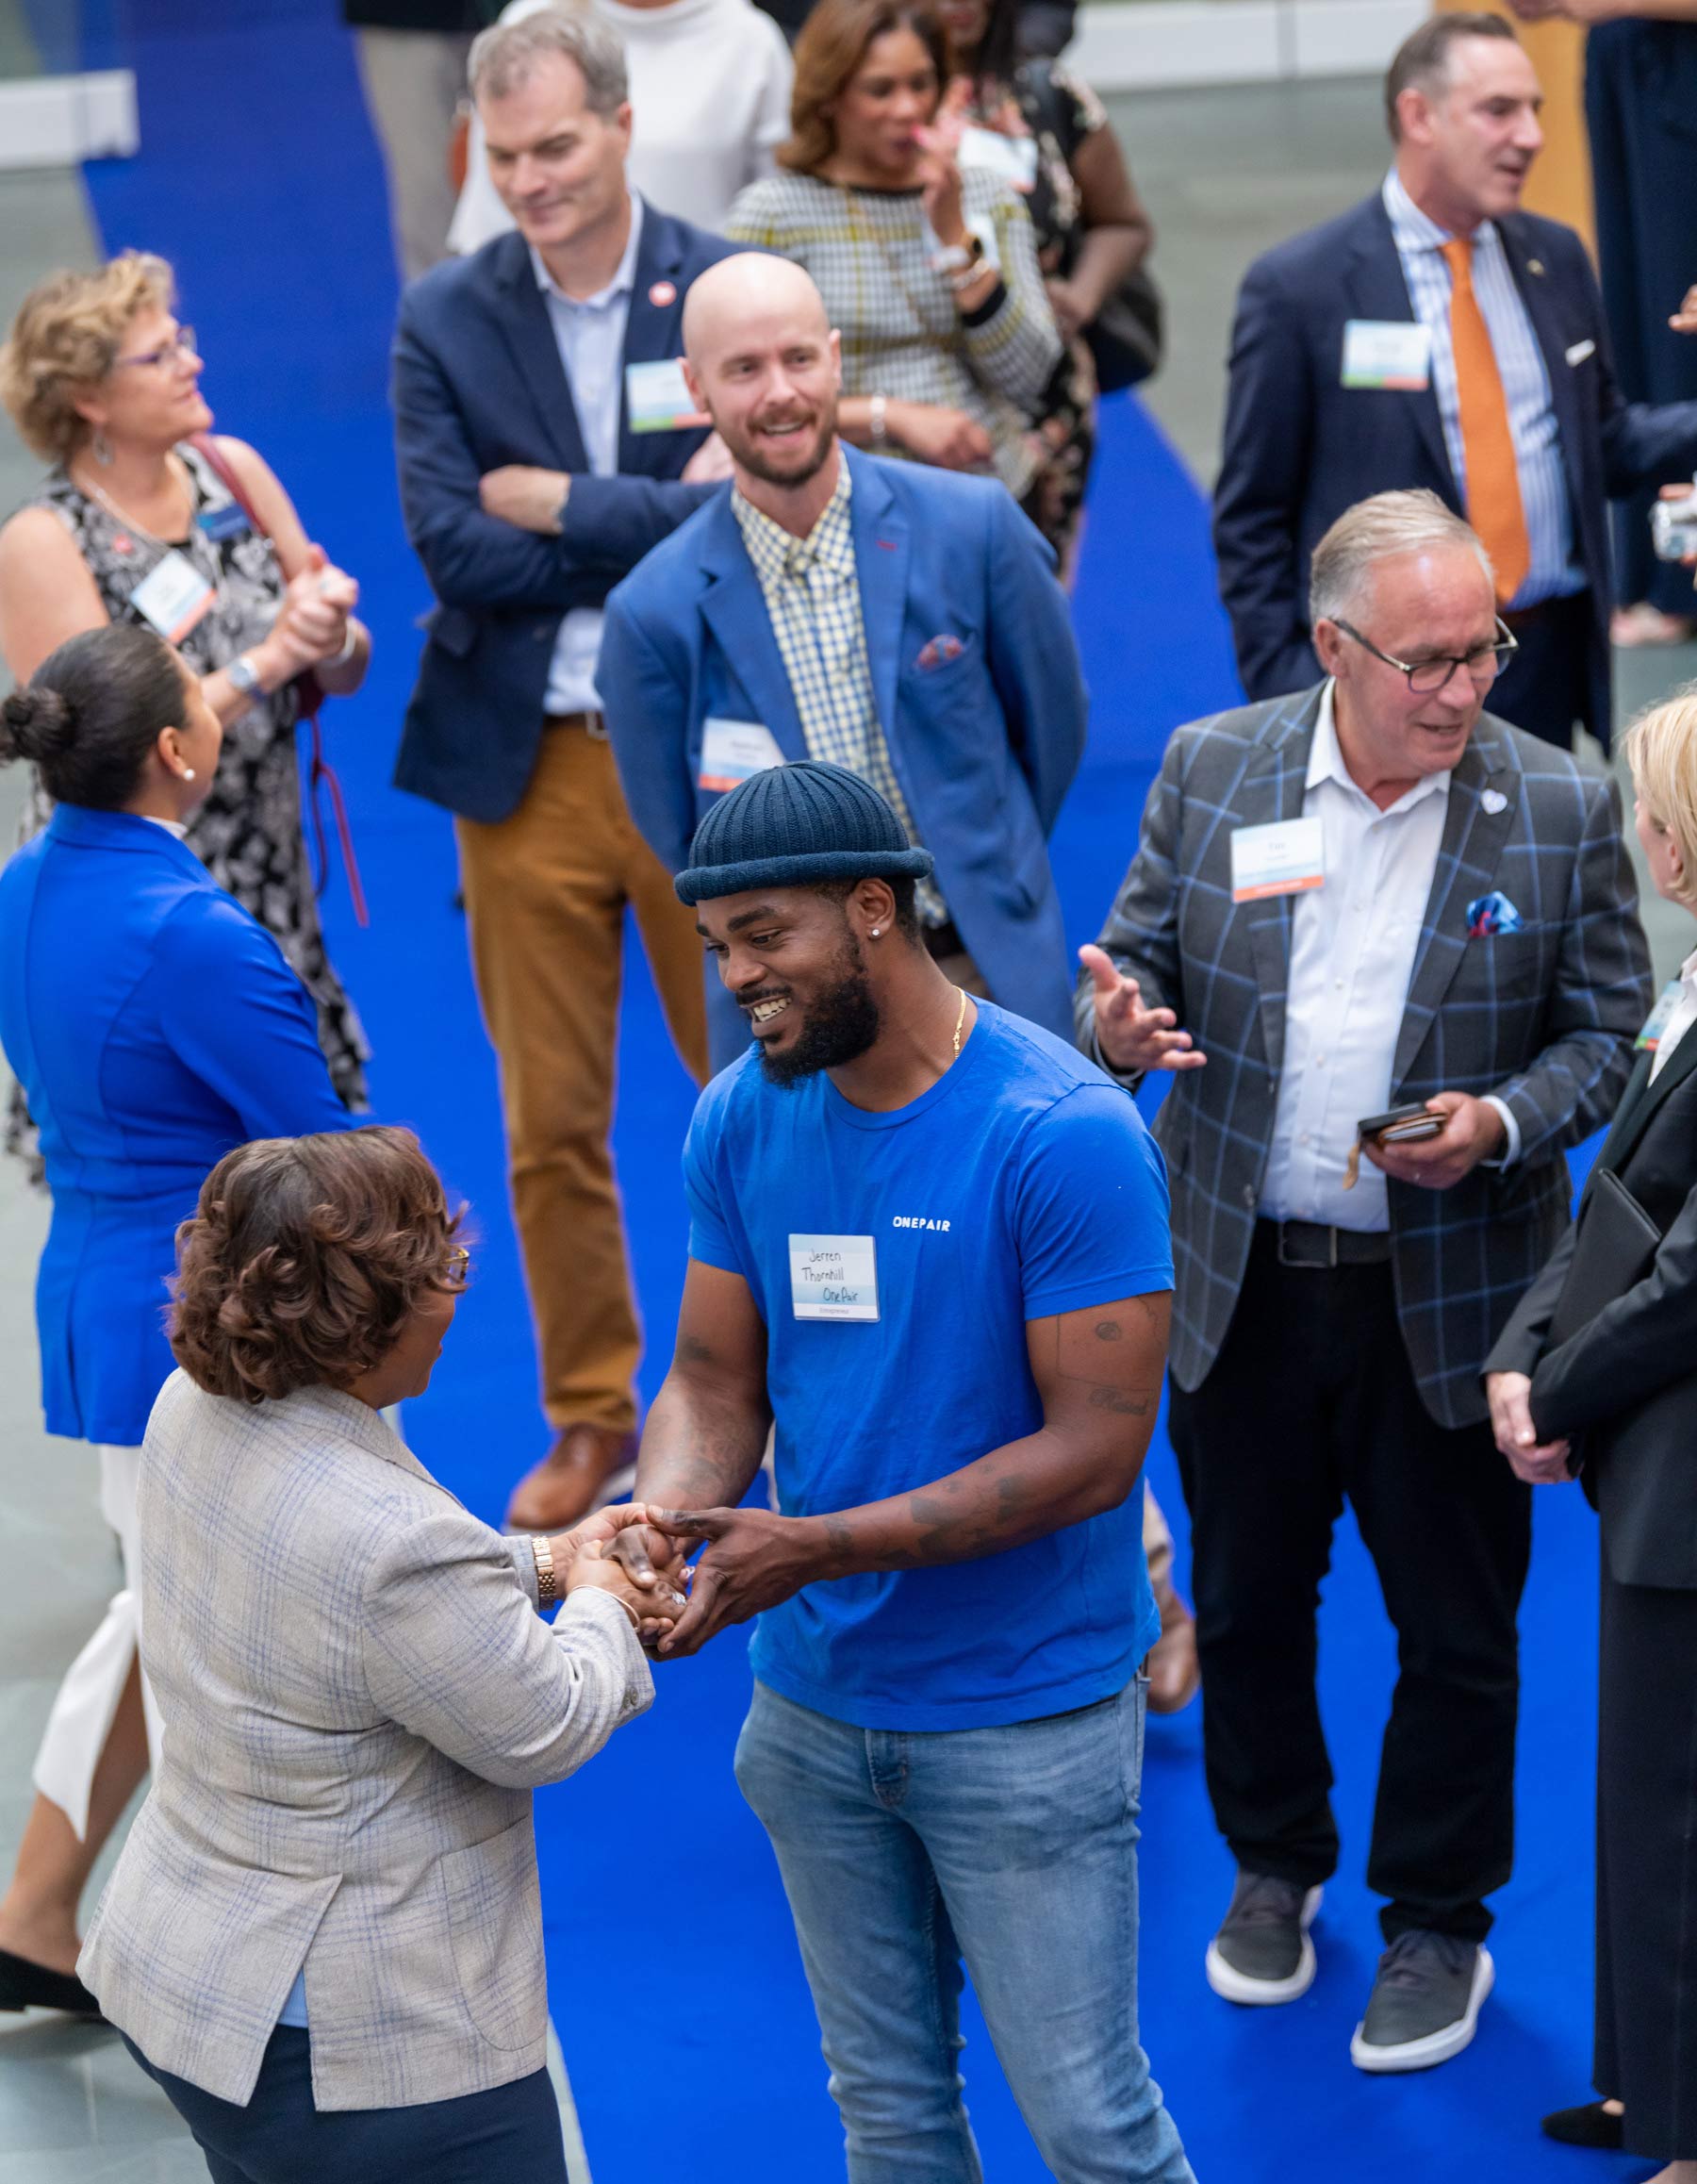 With open doors, the Kauffman Foundation rolls out the blue carpet